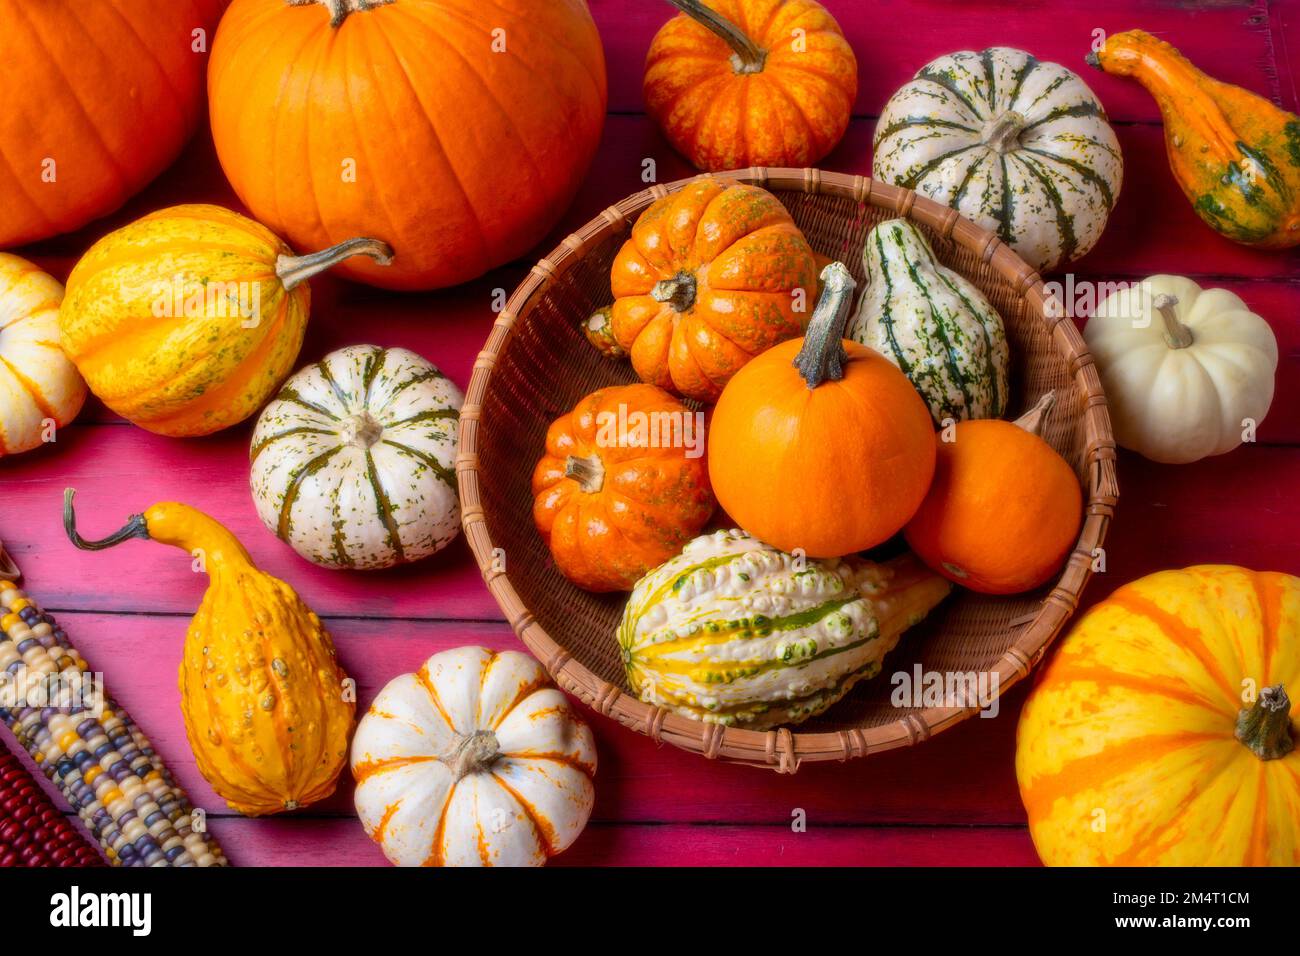 Autumn Pumpkins In Basket With Gourds On Red Boards Still life Stock Photo